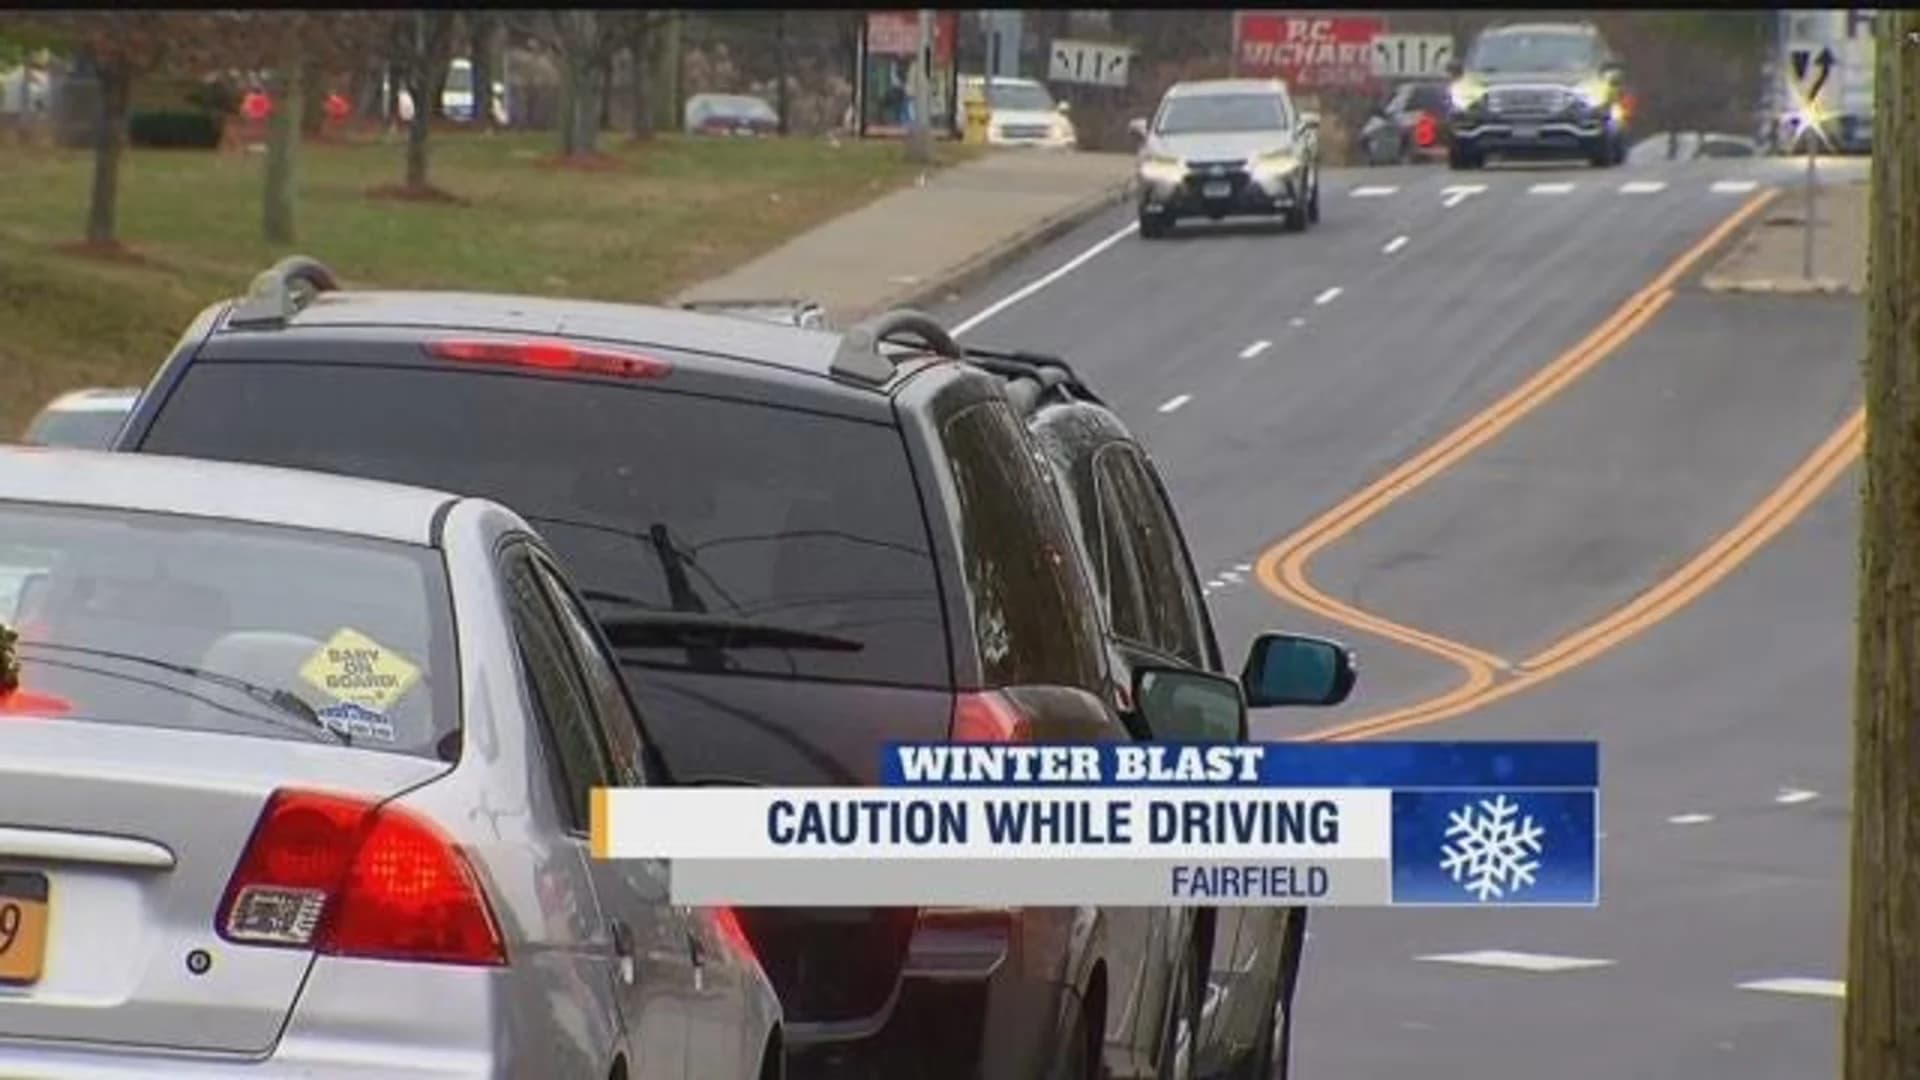 Residents urged to use caution while driving amid snowfall